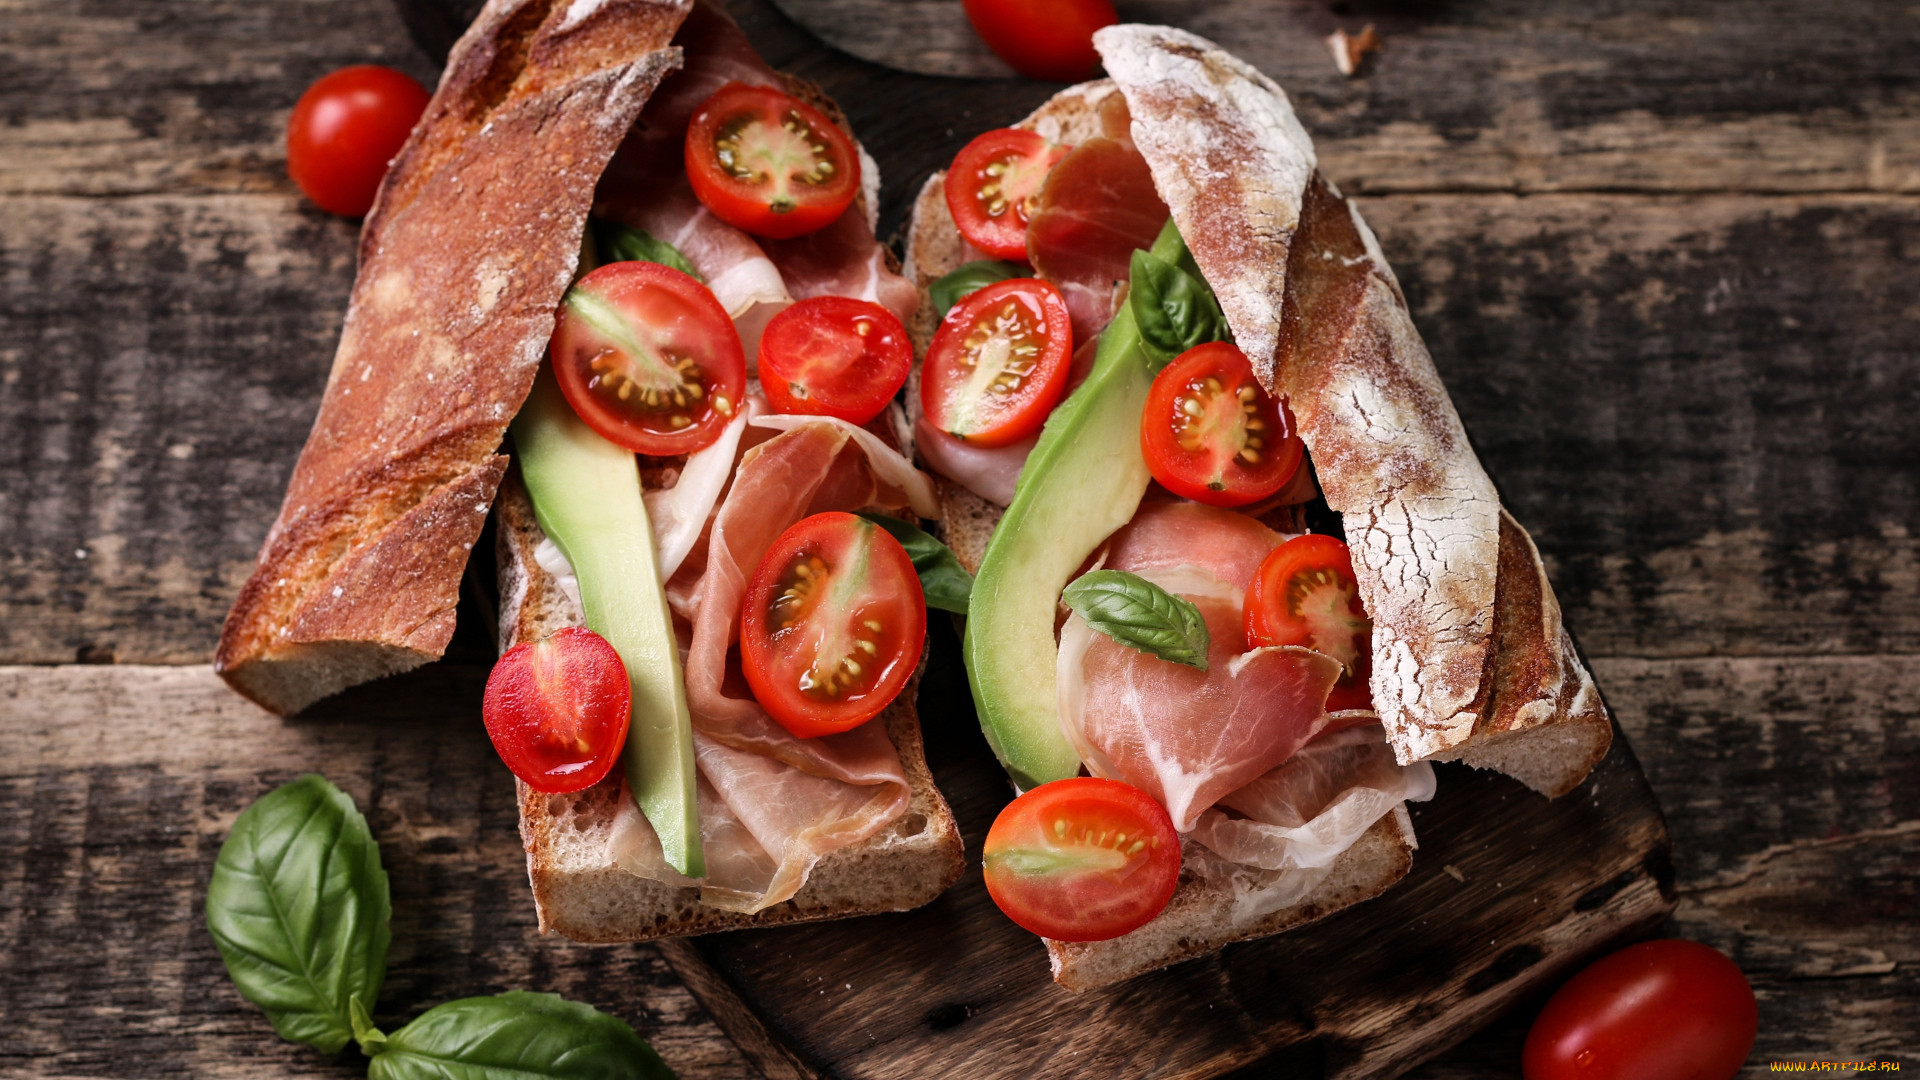 General 1920x1080 sandwiches tomatoes vegetables bread food prosciutto basil avocados wooden surface